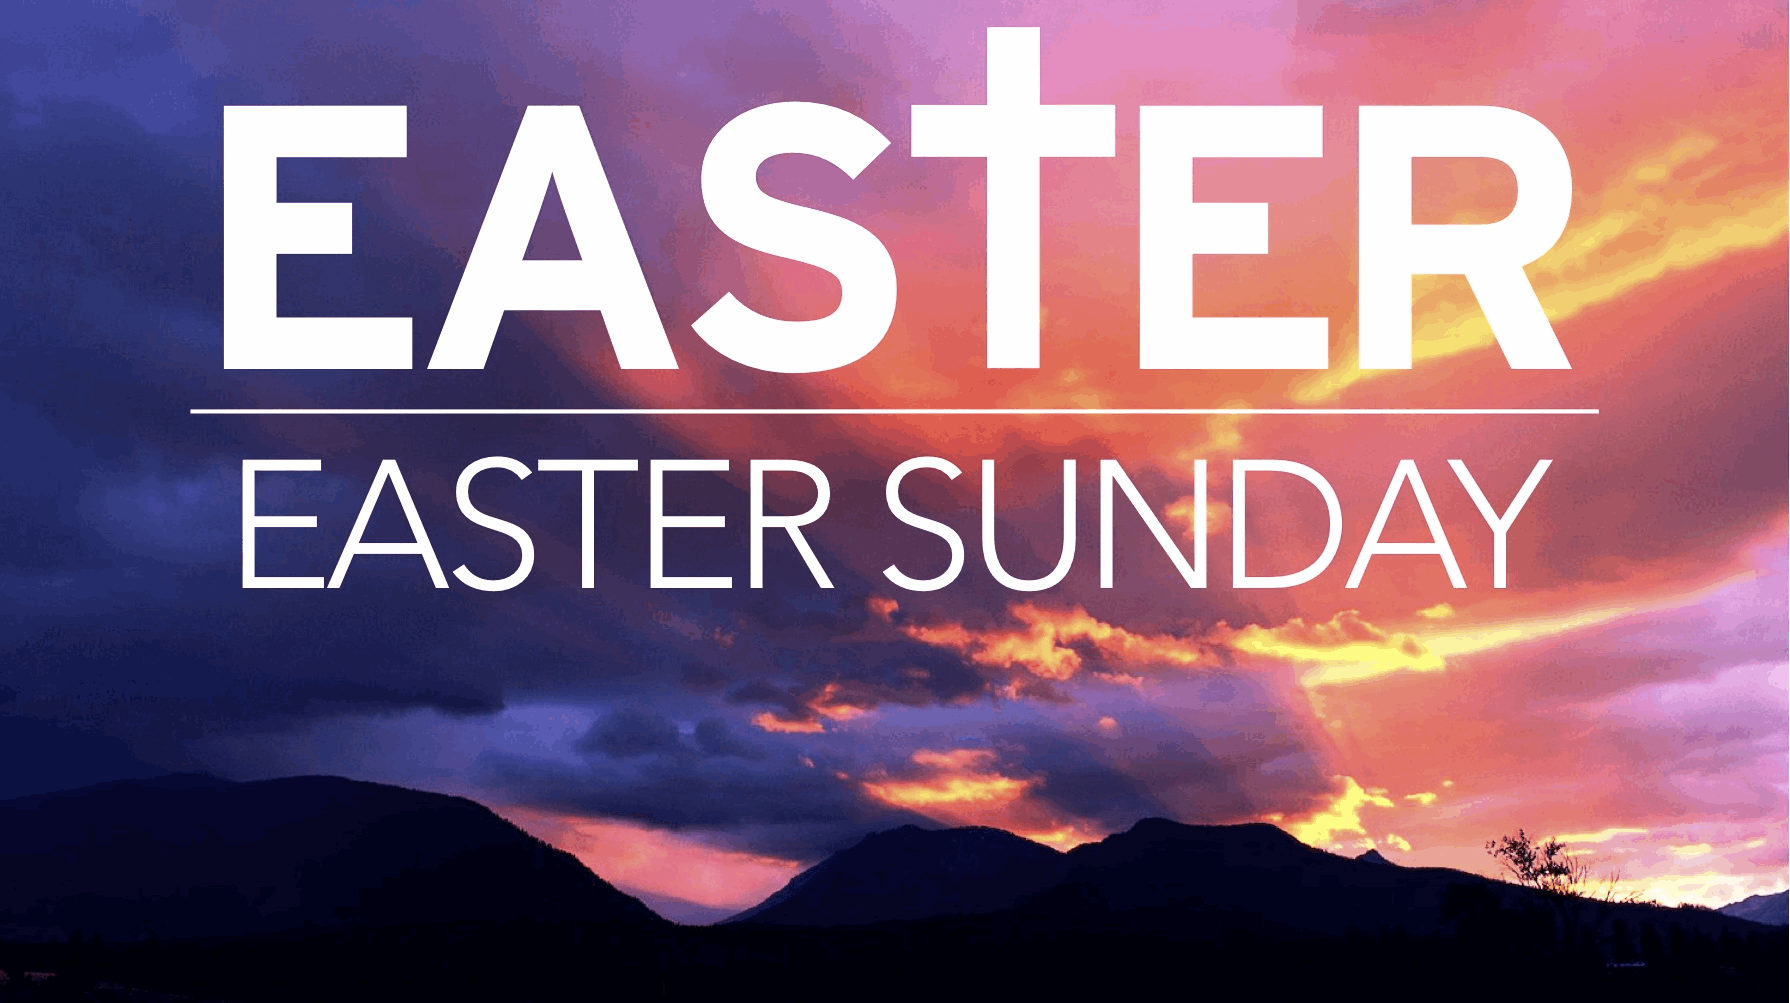 Easter Sunday Wishes Wallpaper